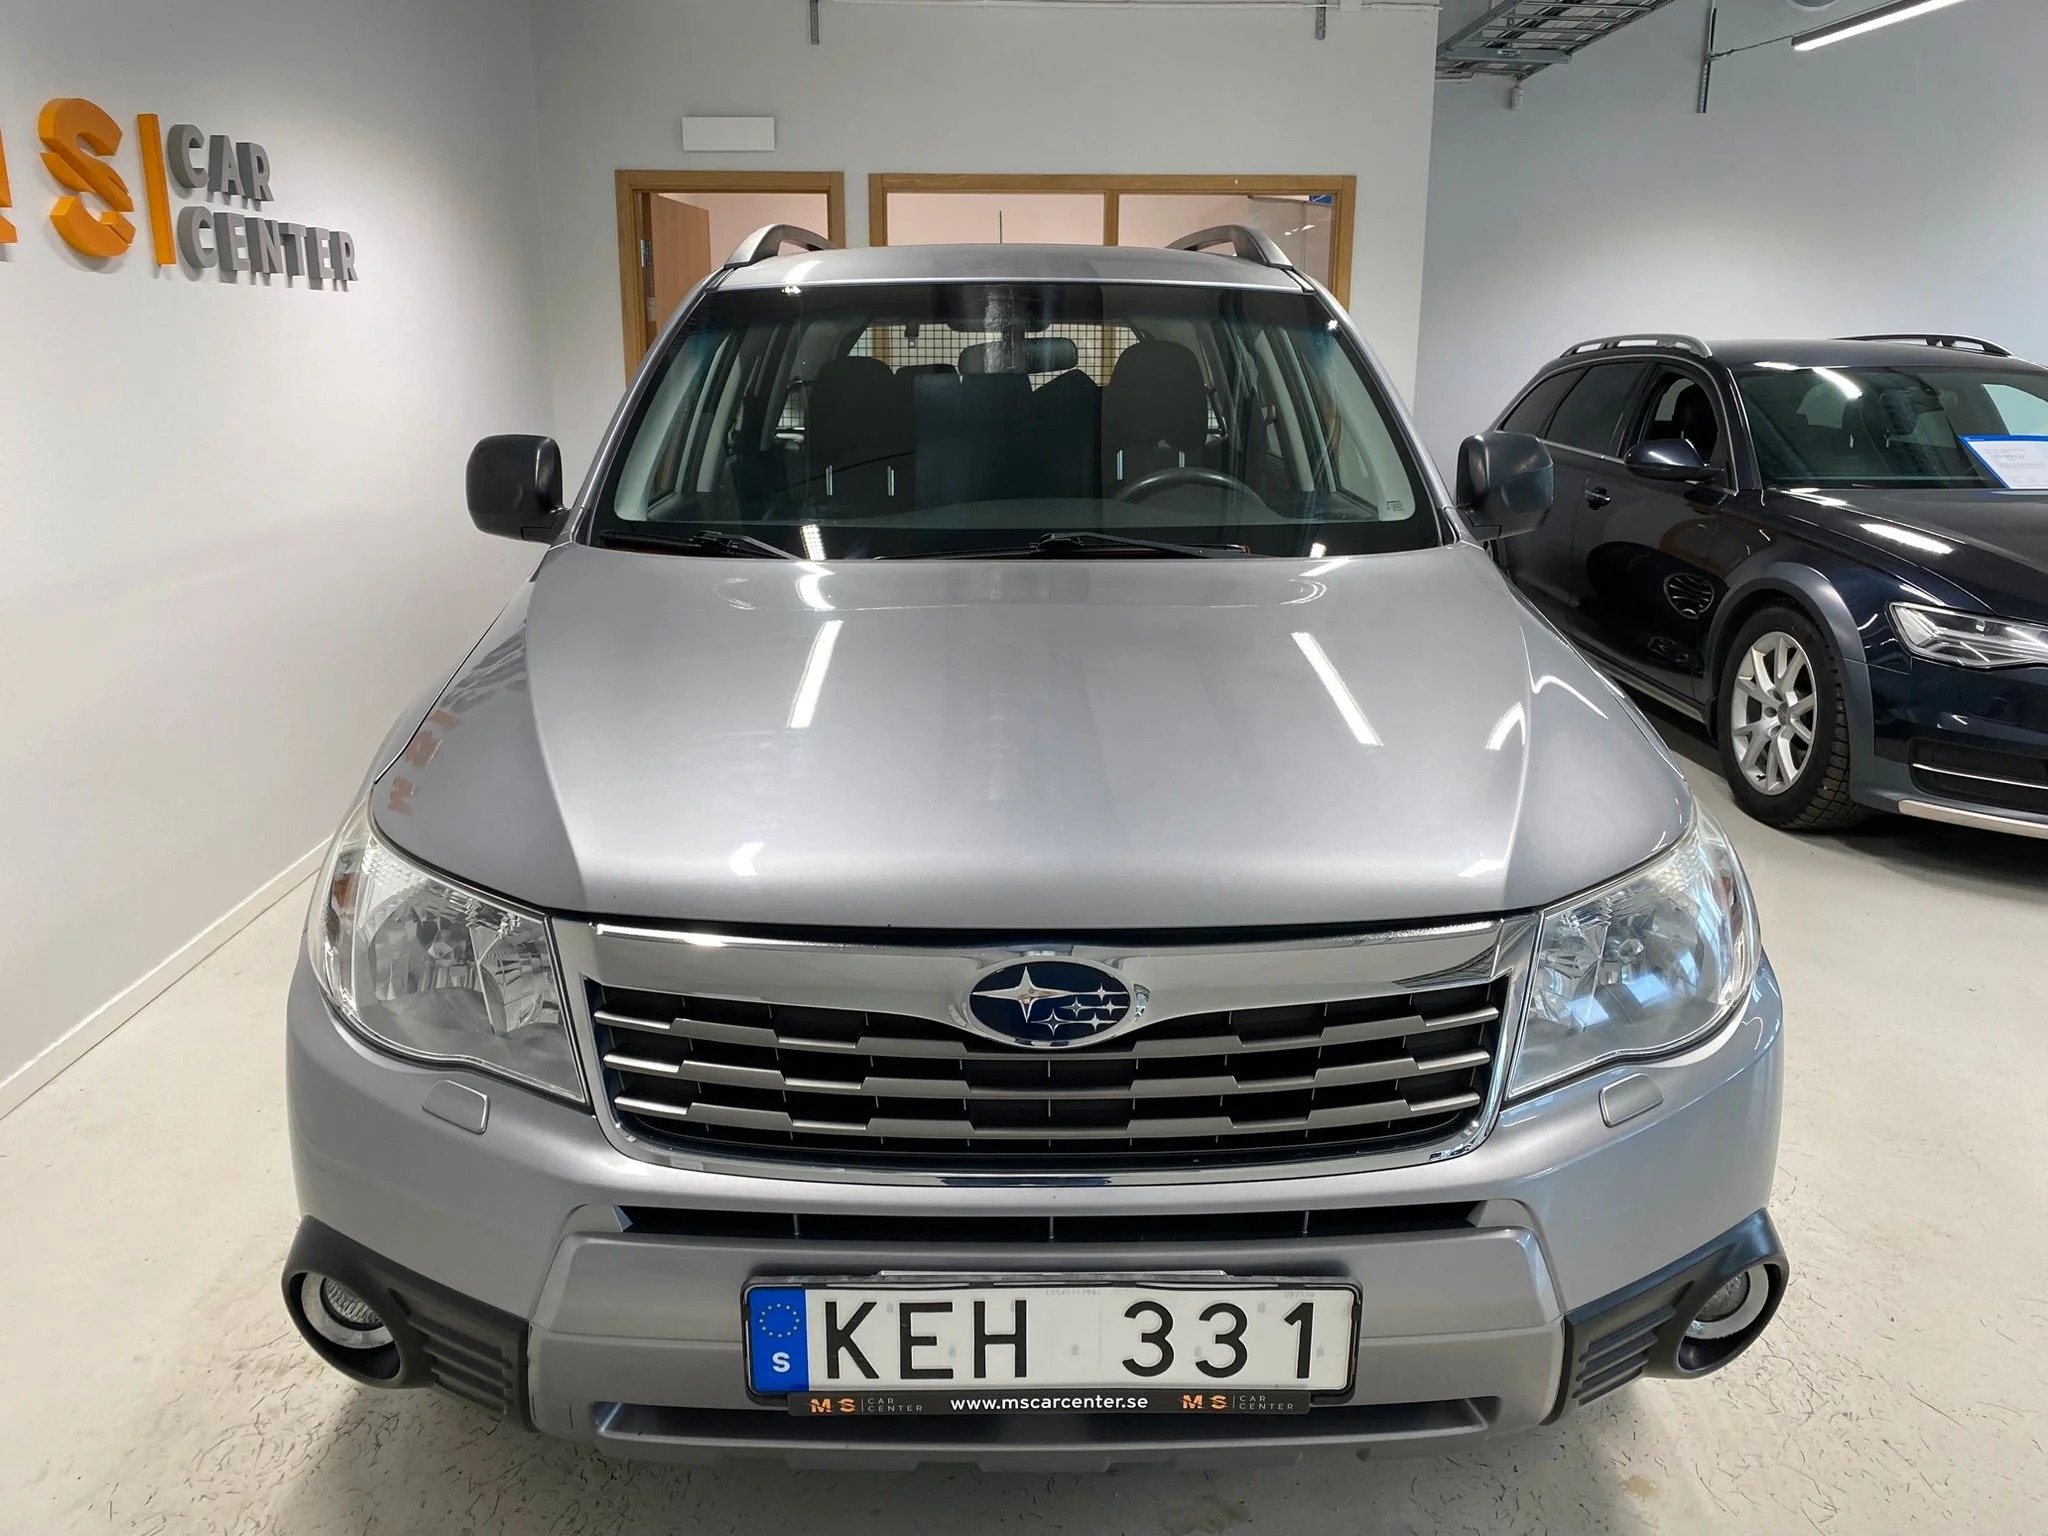 Subaru Forester 2.0 X 4WD Automatisk, 150hk, 2010